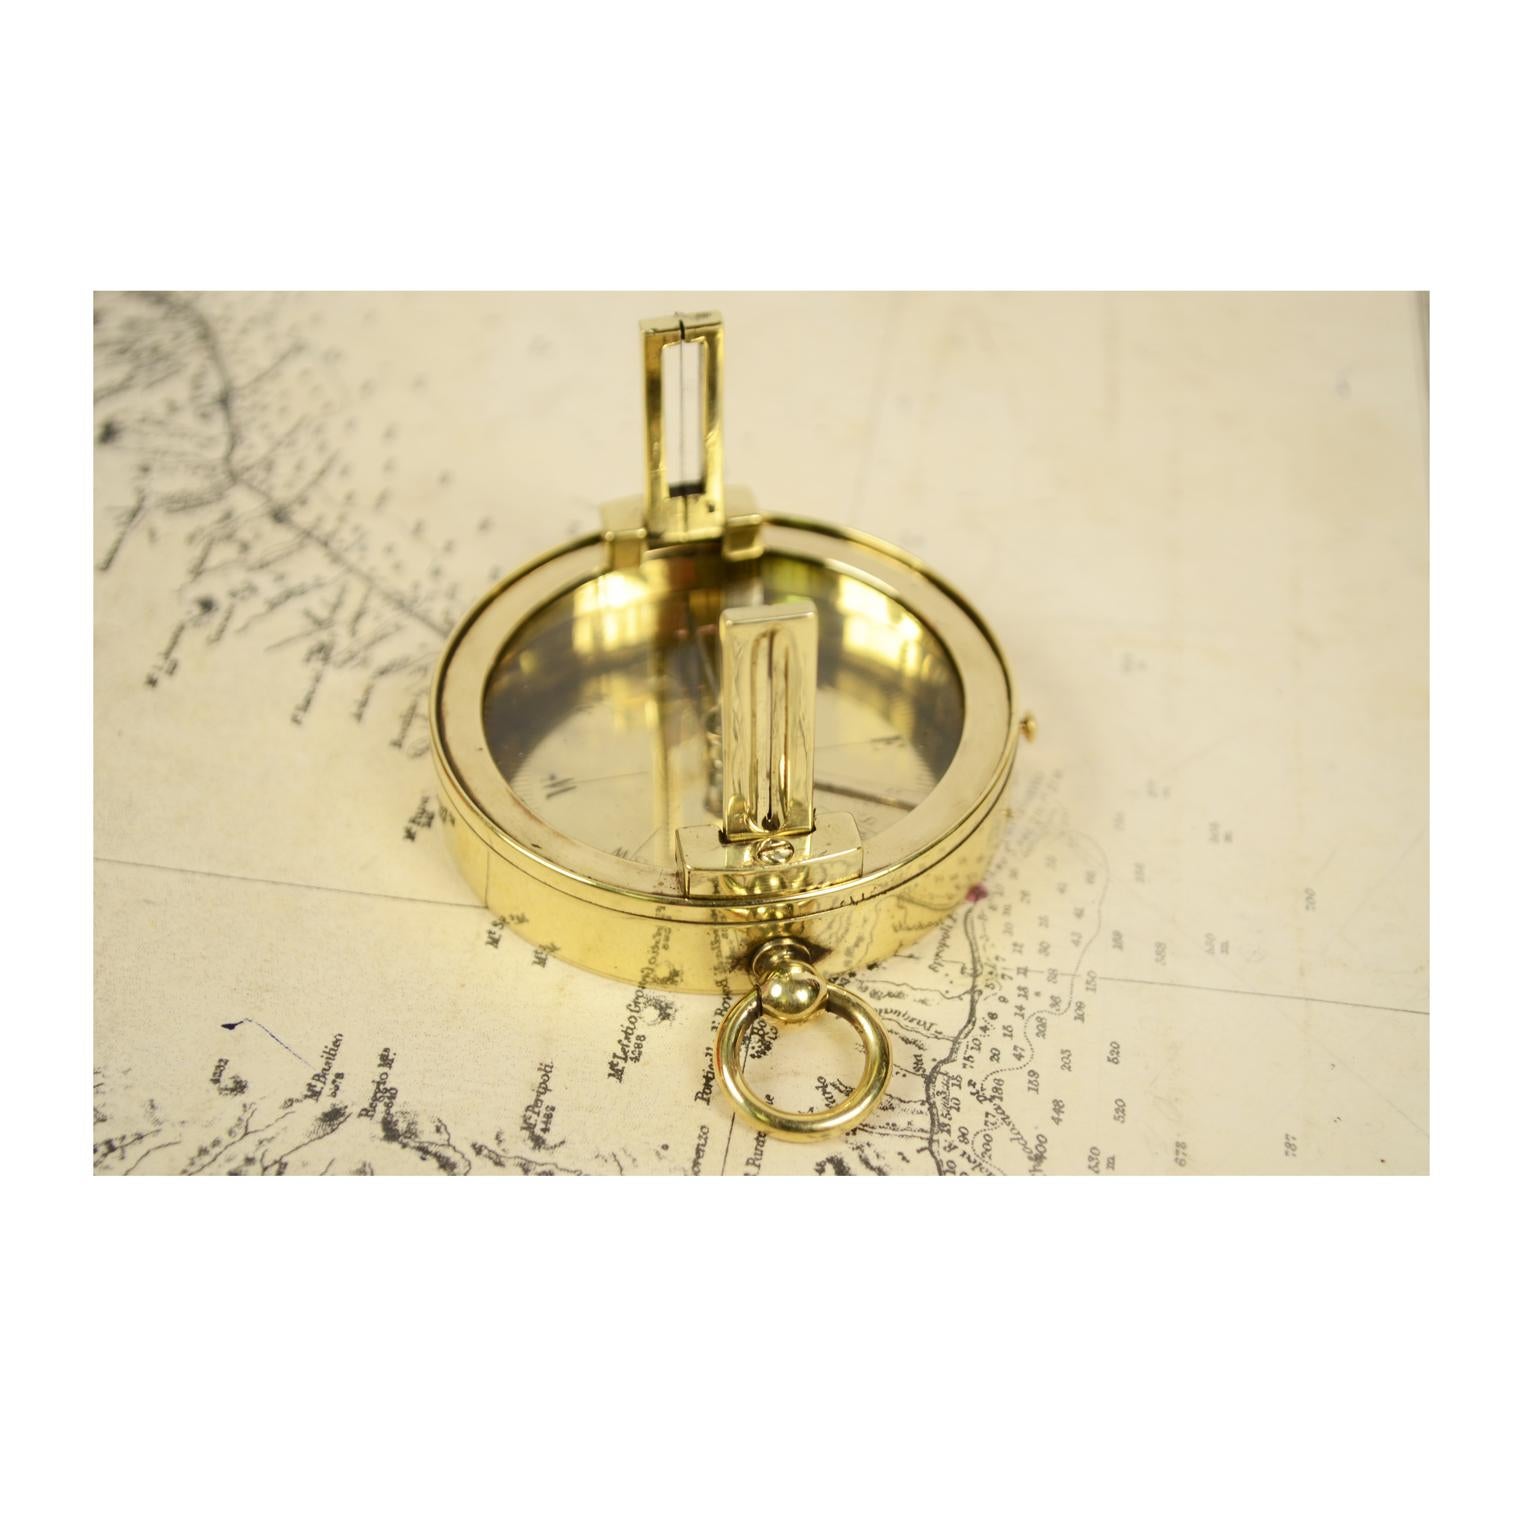 Small French-Made Brass Compass Second Half of the 19th Century 1